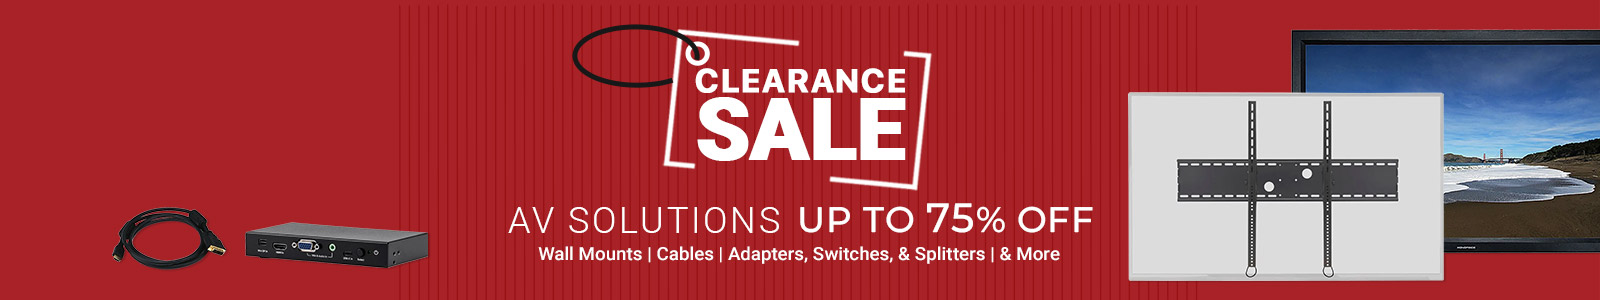 Clearance Sale
AV Solutions 
Up to 75% off 
Wall Mounts | Speakers | Cables | Adapters, Switches, & Splitters | & More
Shop Now